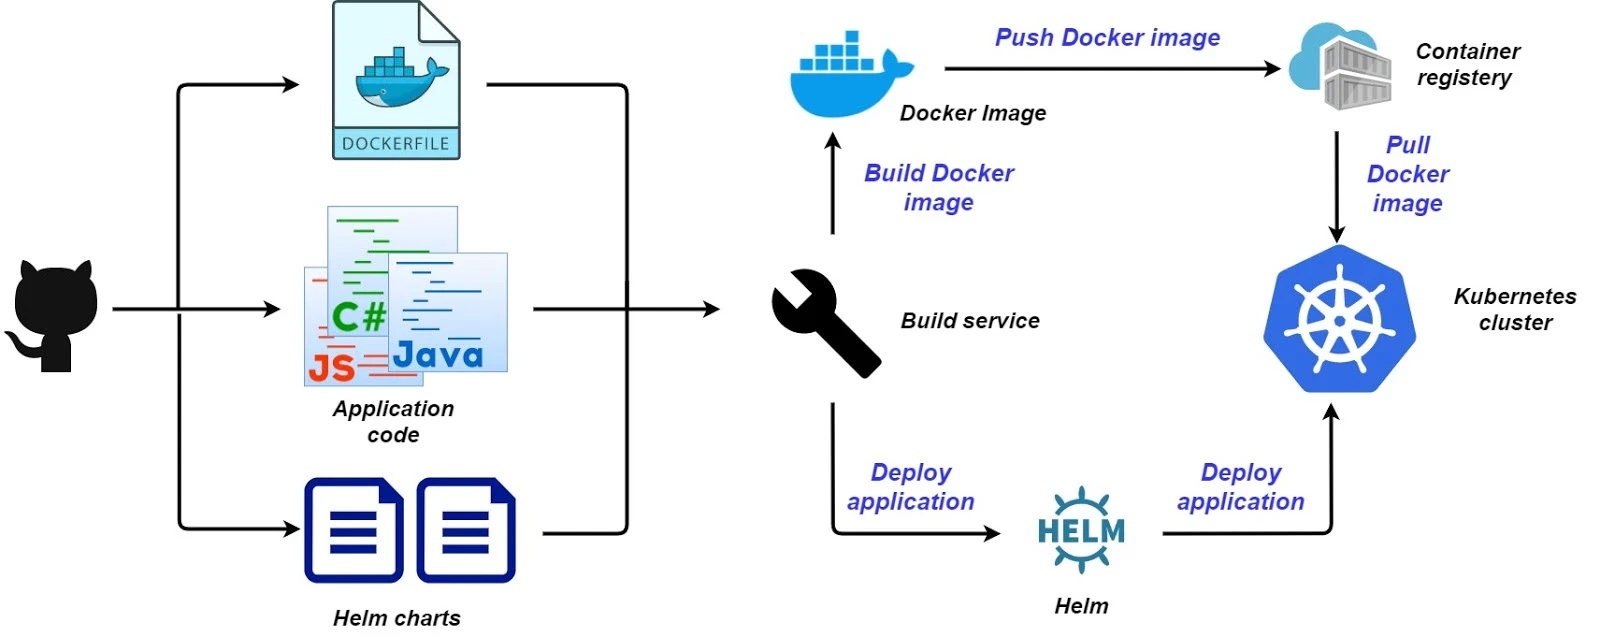 Using Helm for Kubernetes deployment